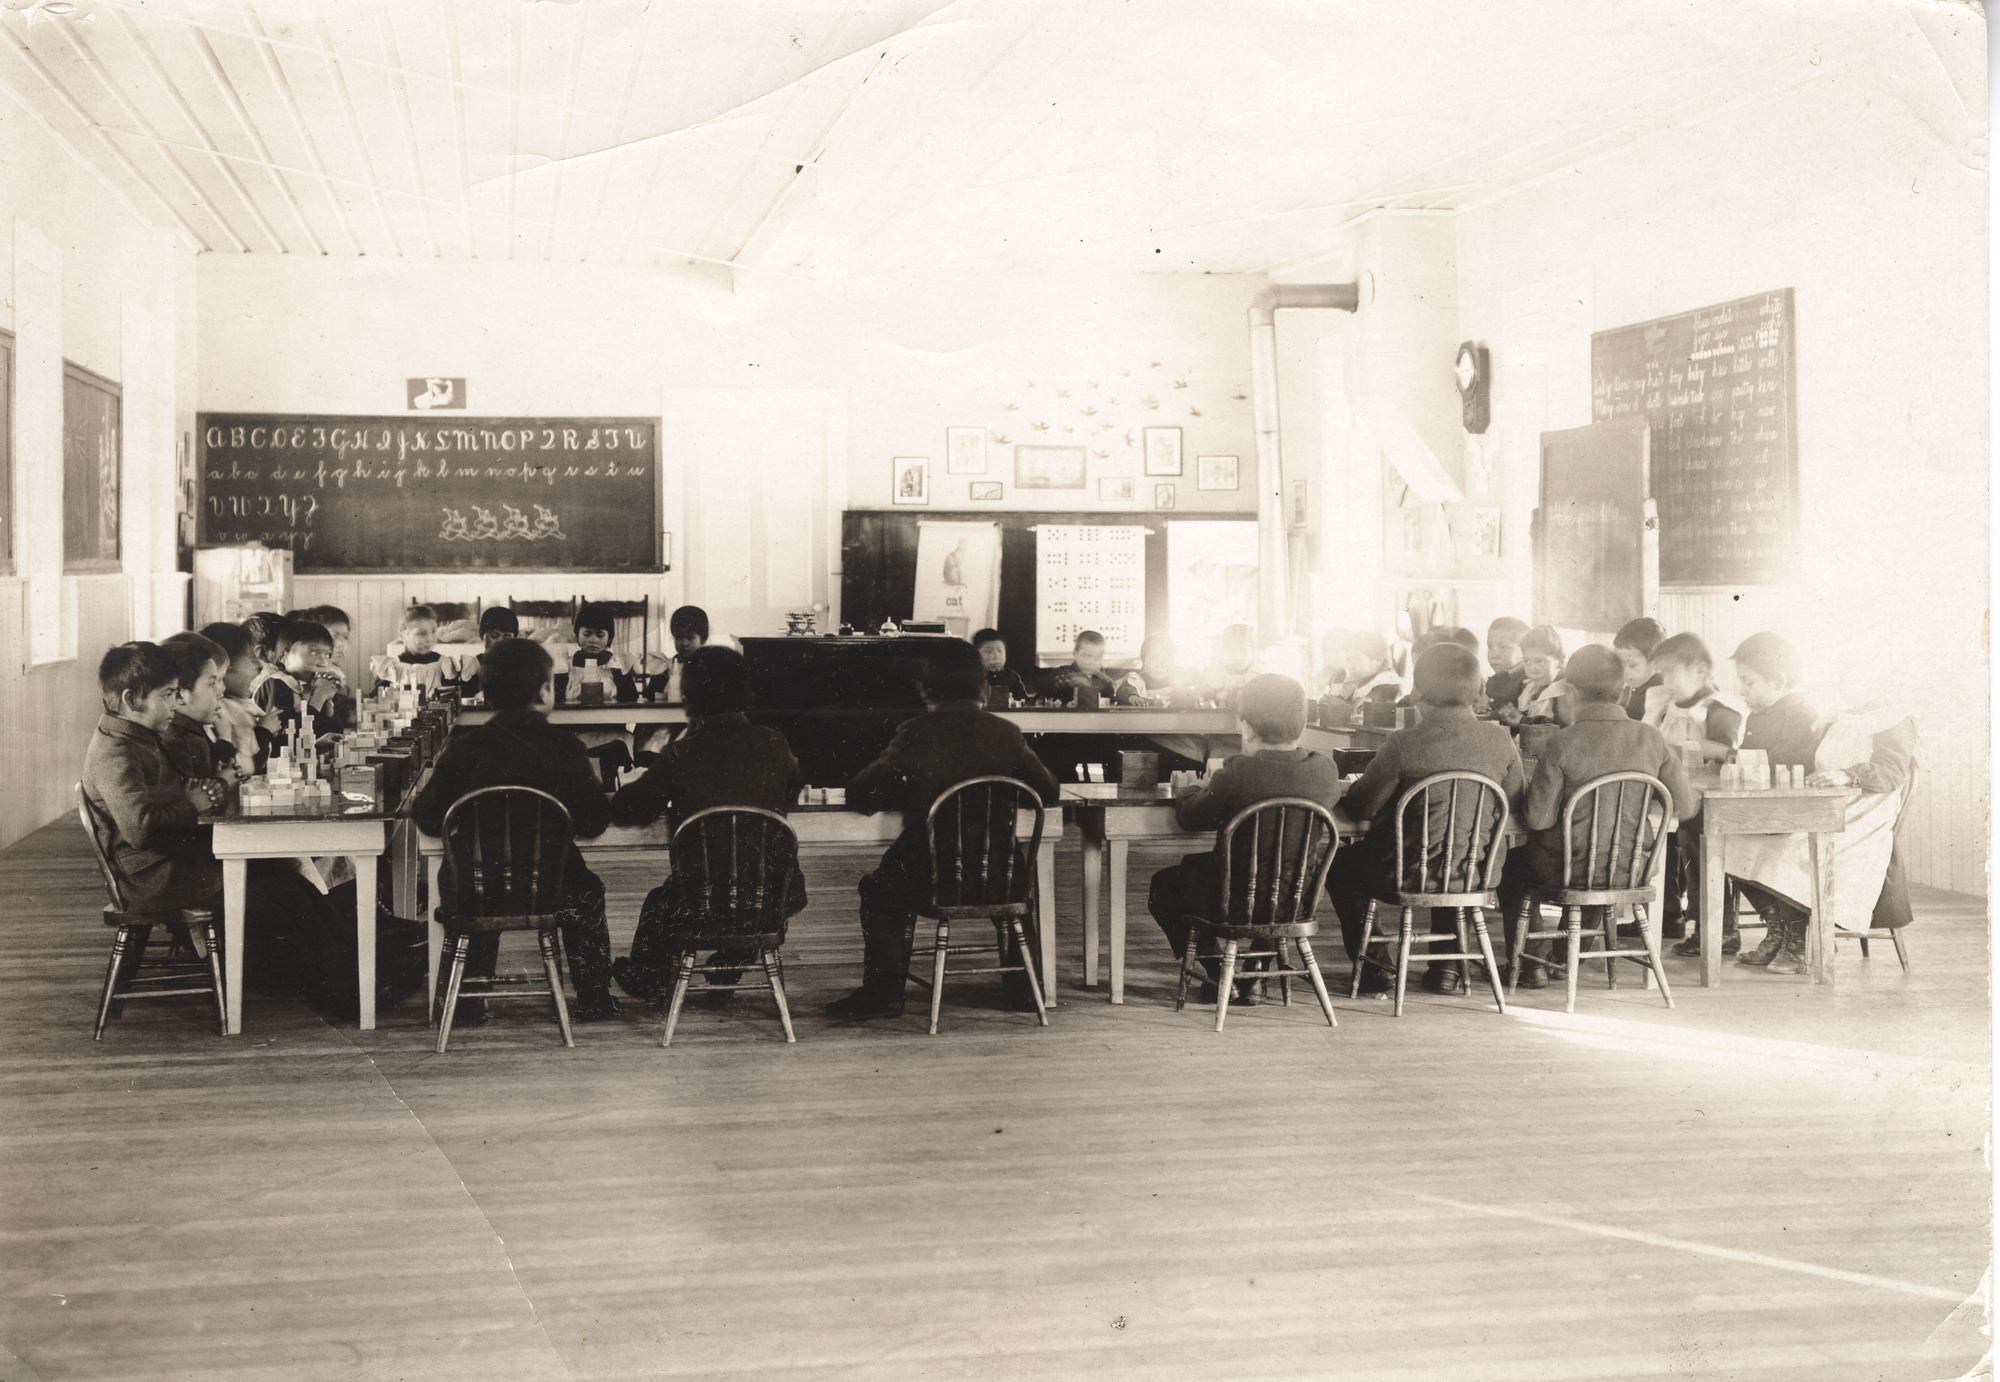 Black and white photograph of children sitting at tables in a plain room with posters and chalkboards on the walls